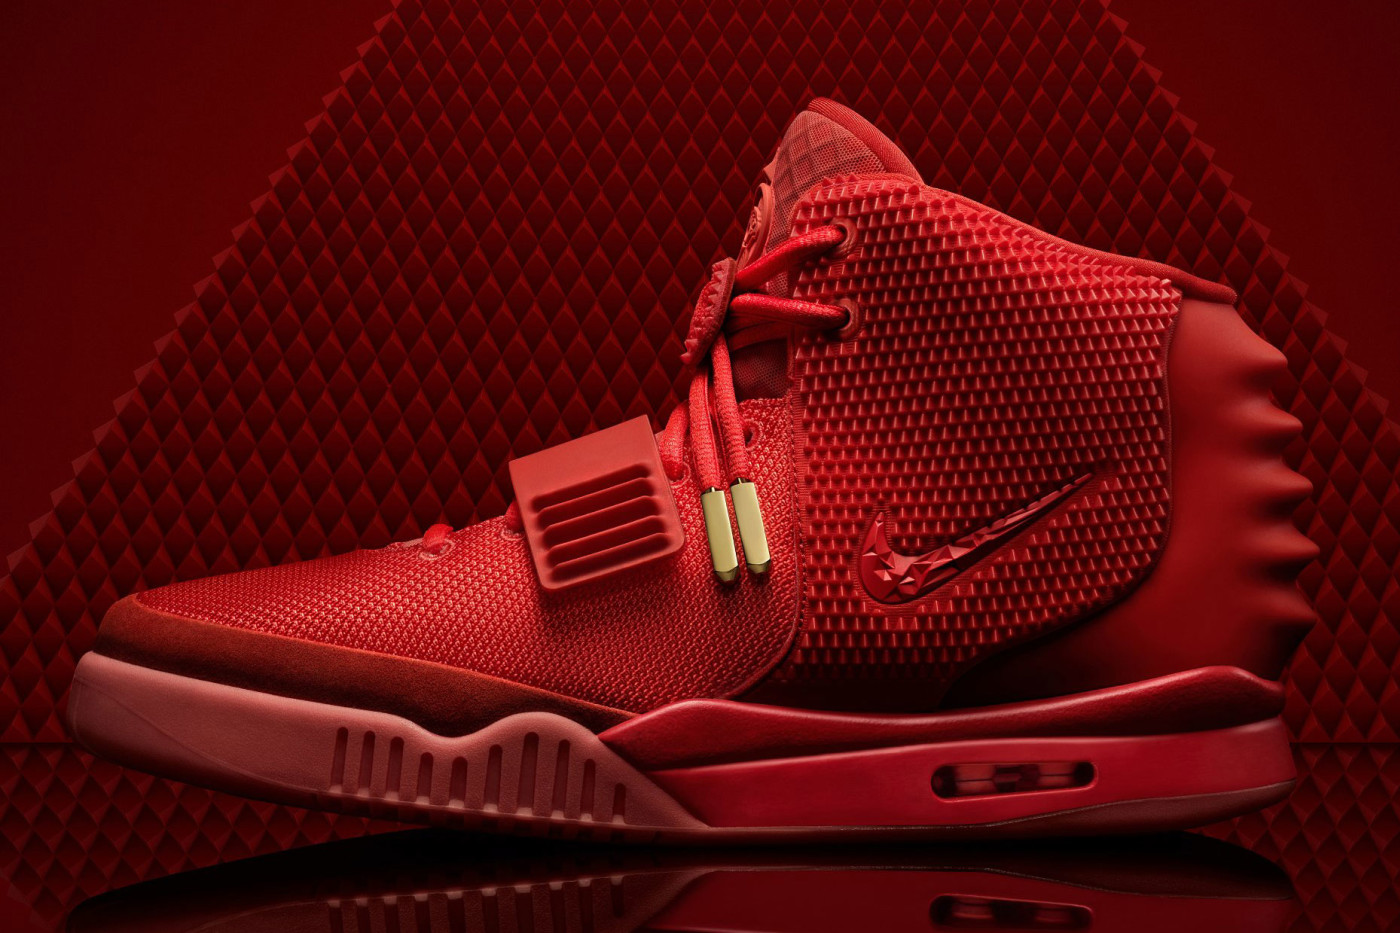 red october colourway from the nike air yeezy 2s